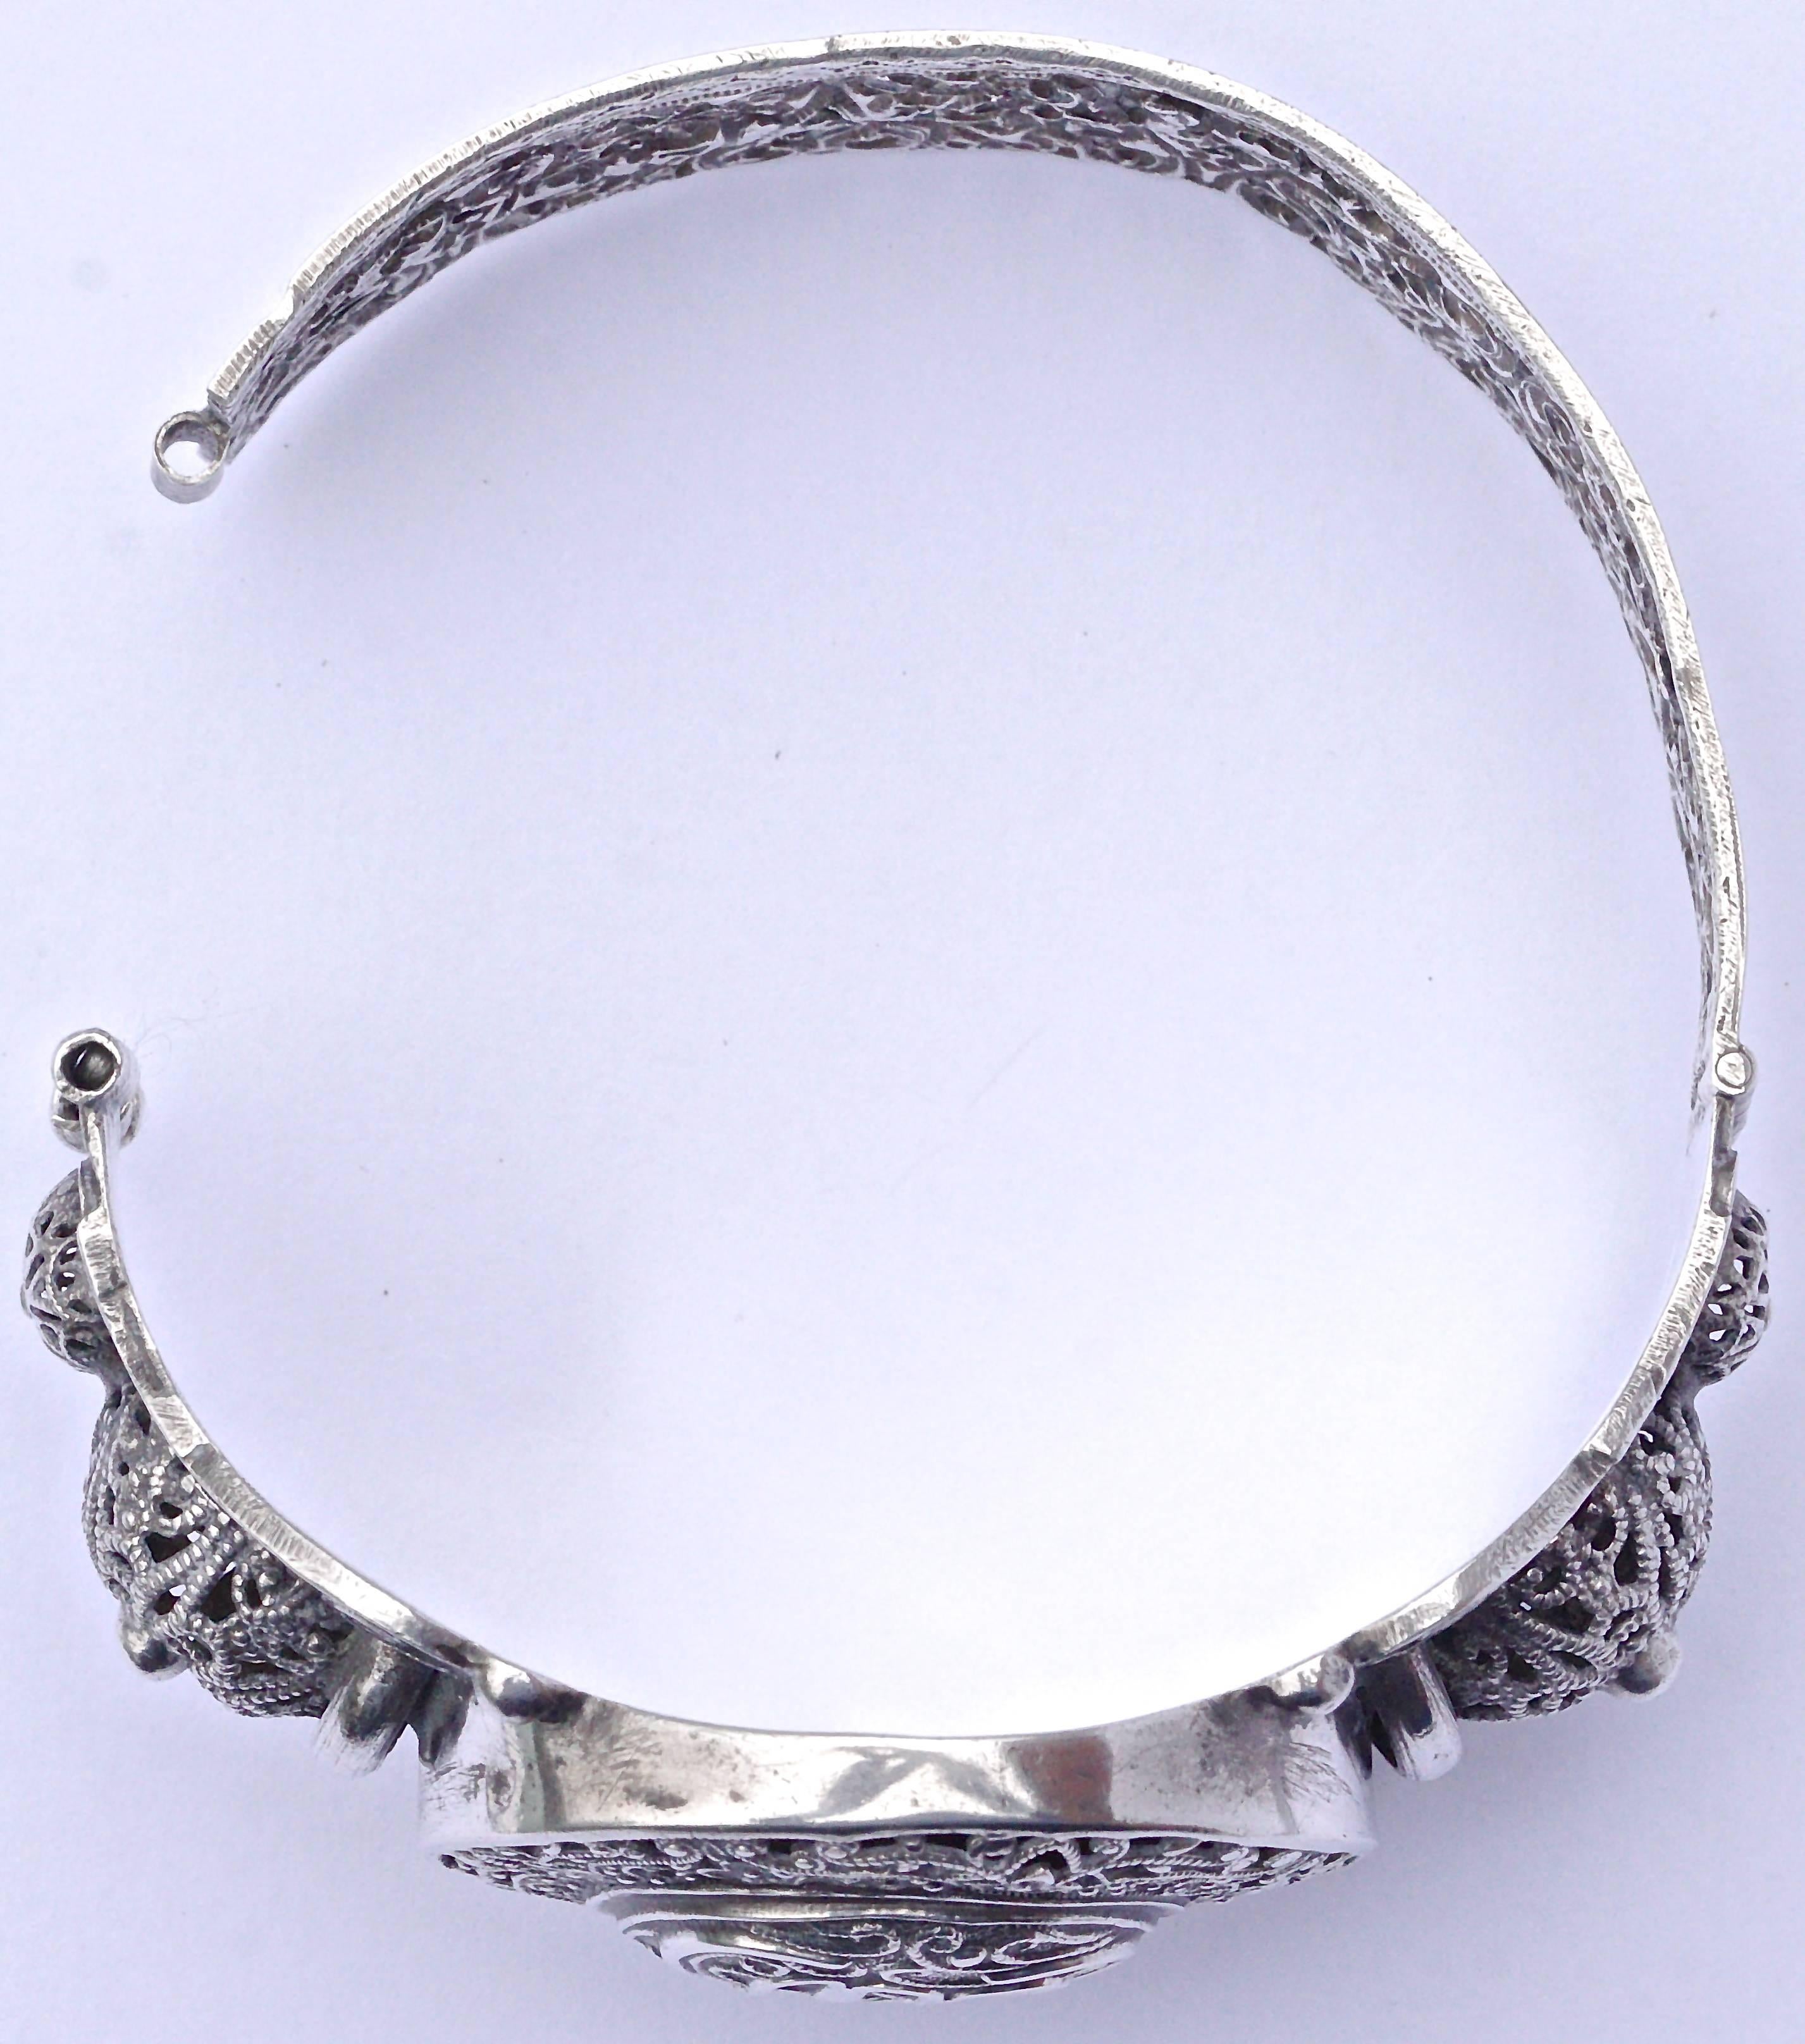 Women's Arabic Hand Crafted Ornate Filigree Silver Bracelet circa 1930s For Sale